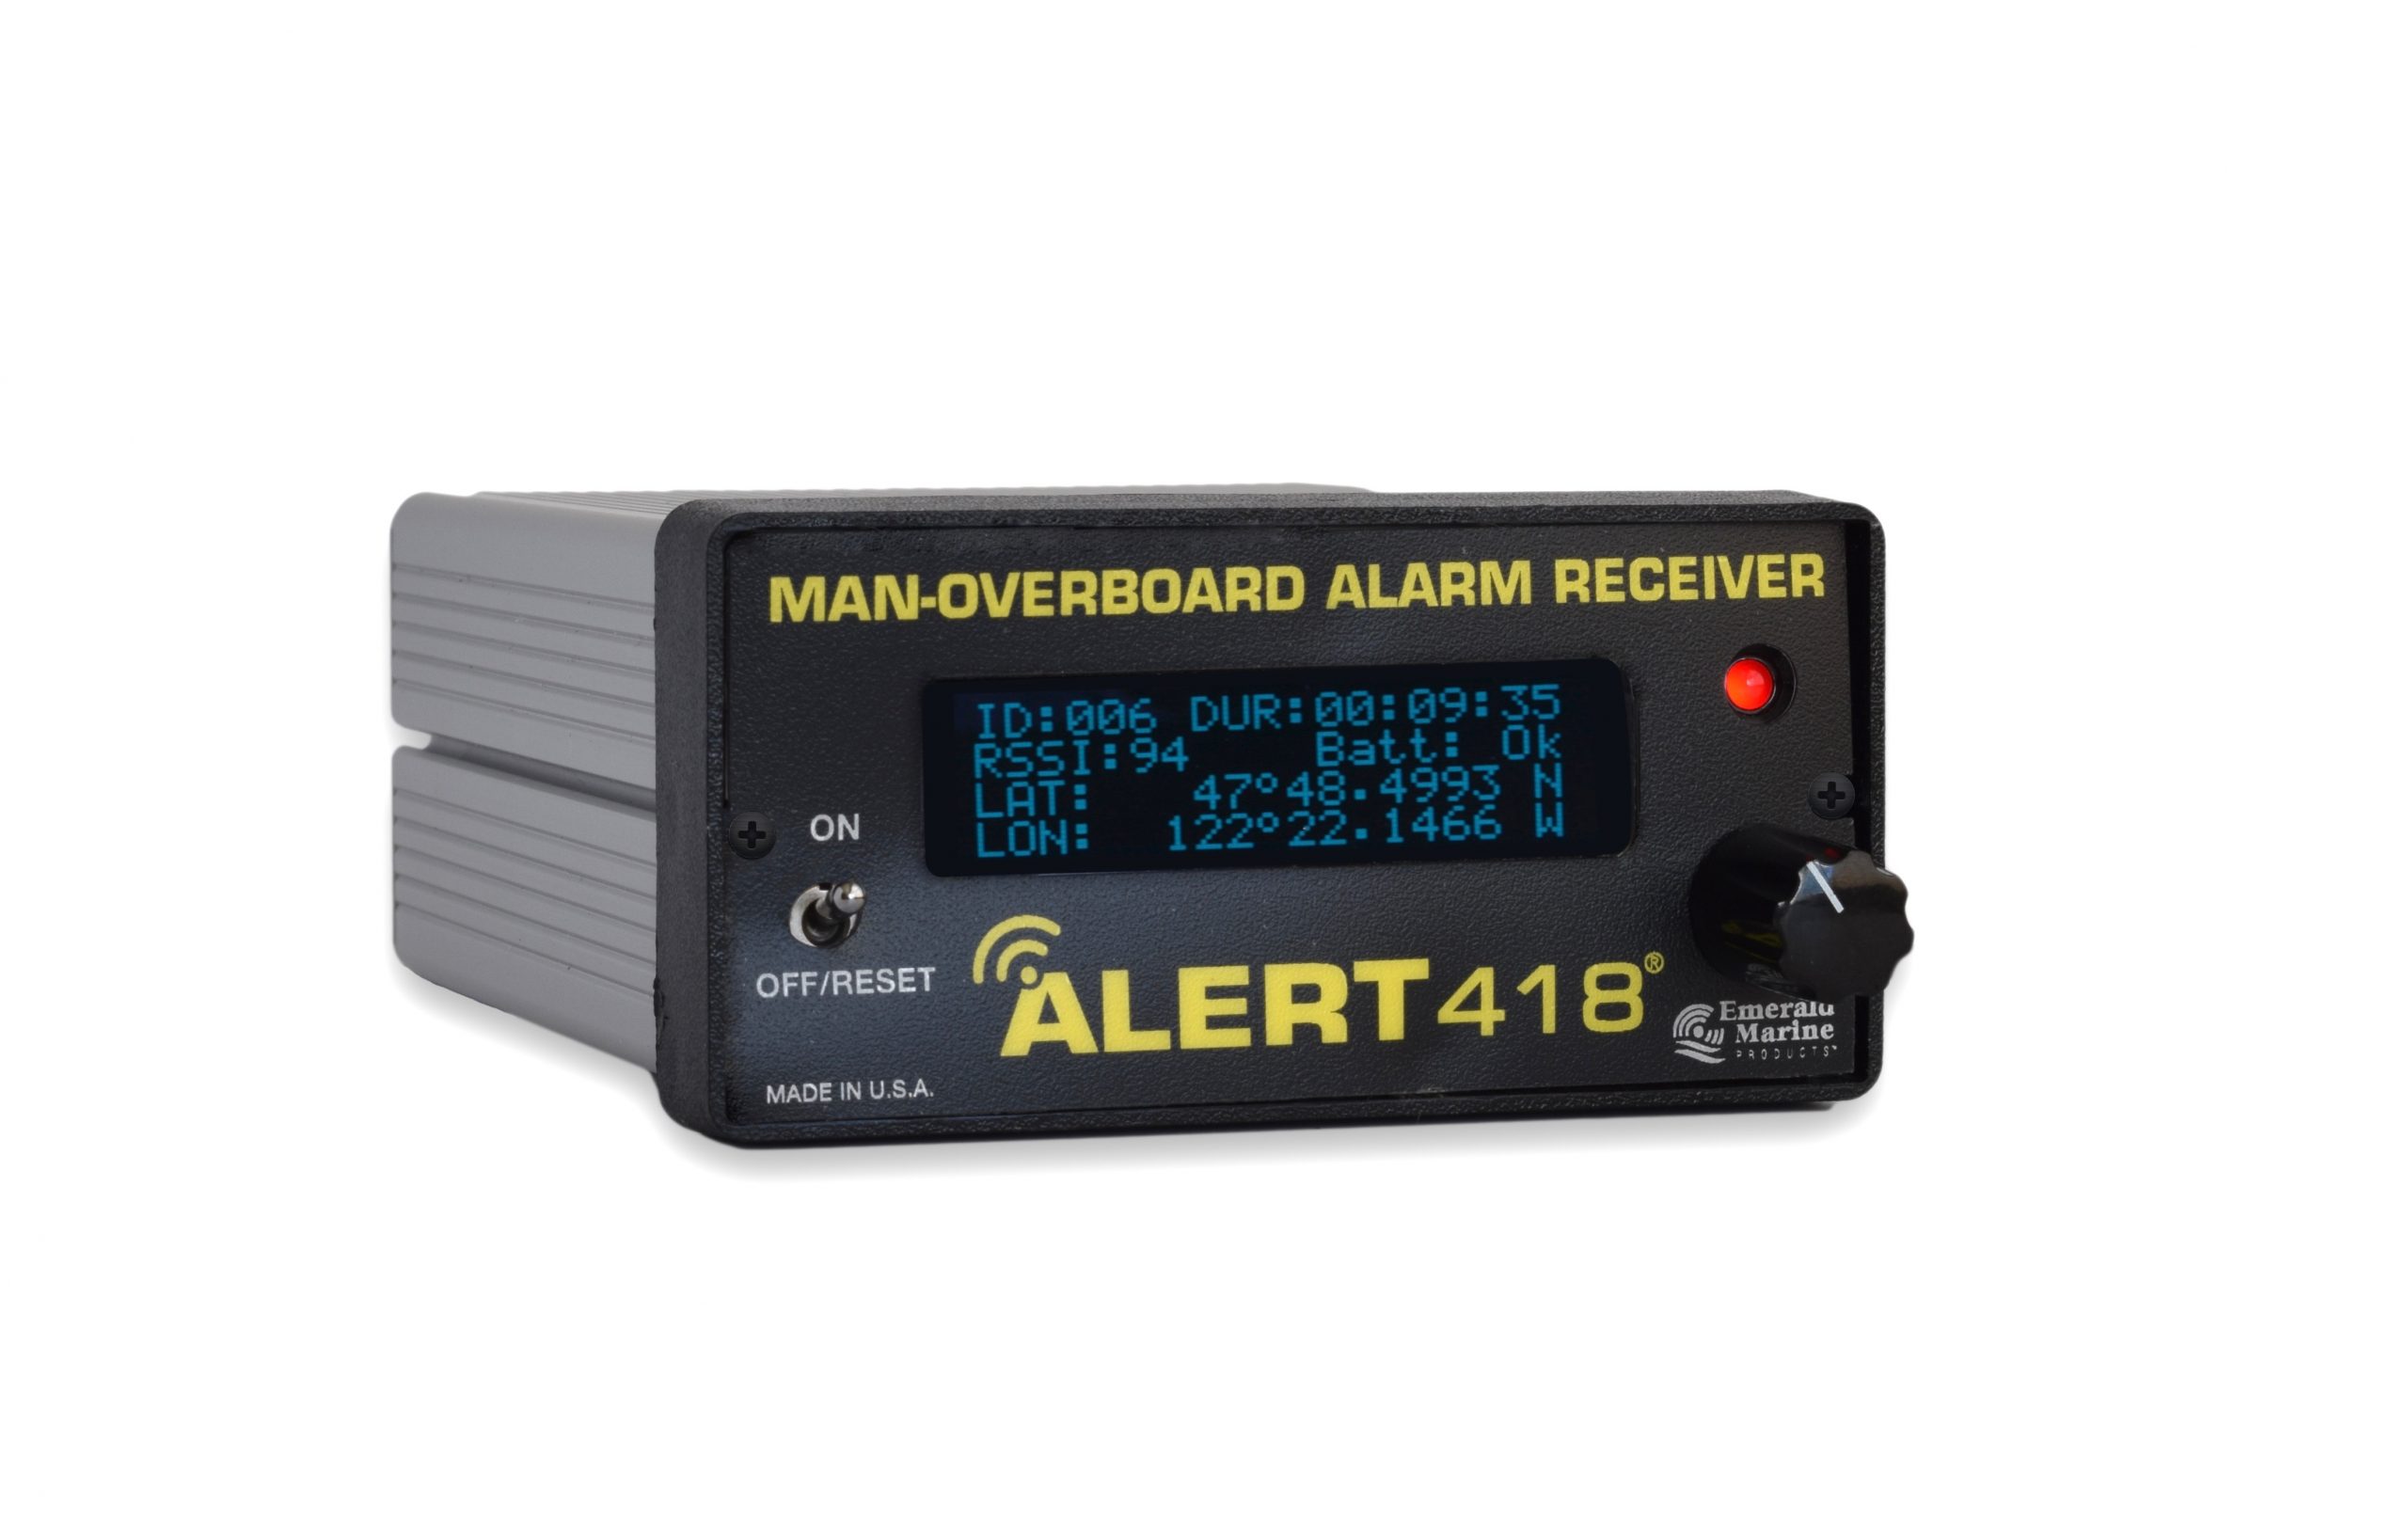 ALERT418® Overboard Receiver, Man Overboard Alarm, Fall Overboard Alarm, Water Rescue Training and Retrieval, Man Overboard